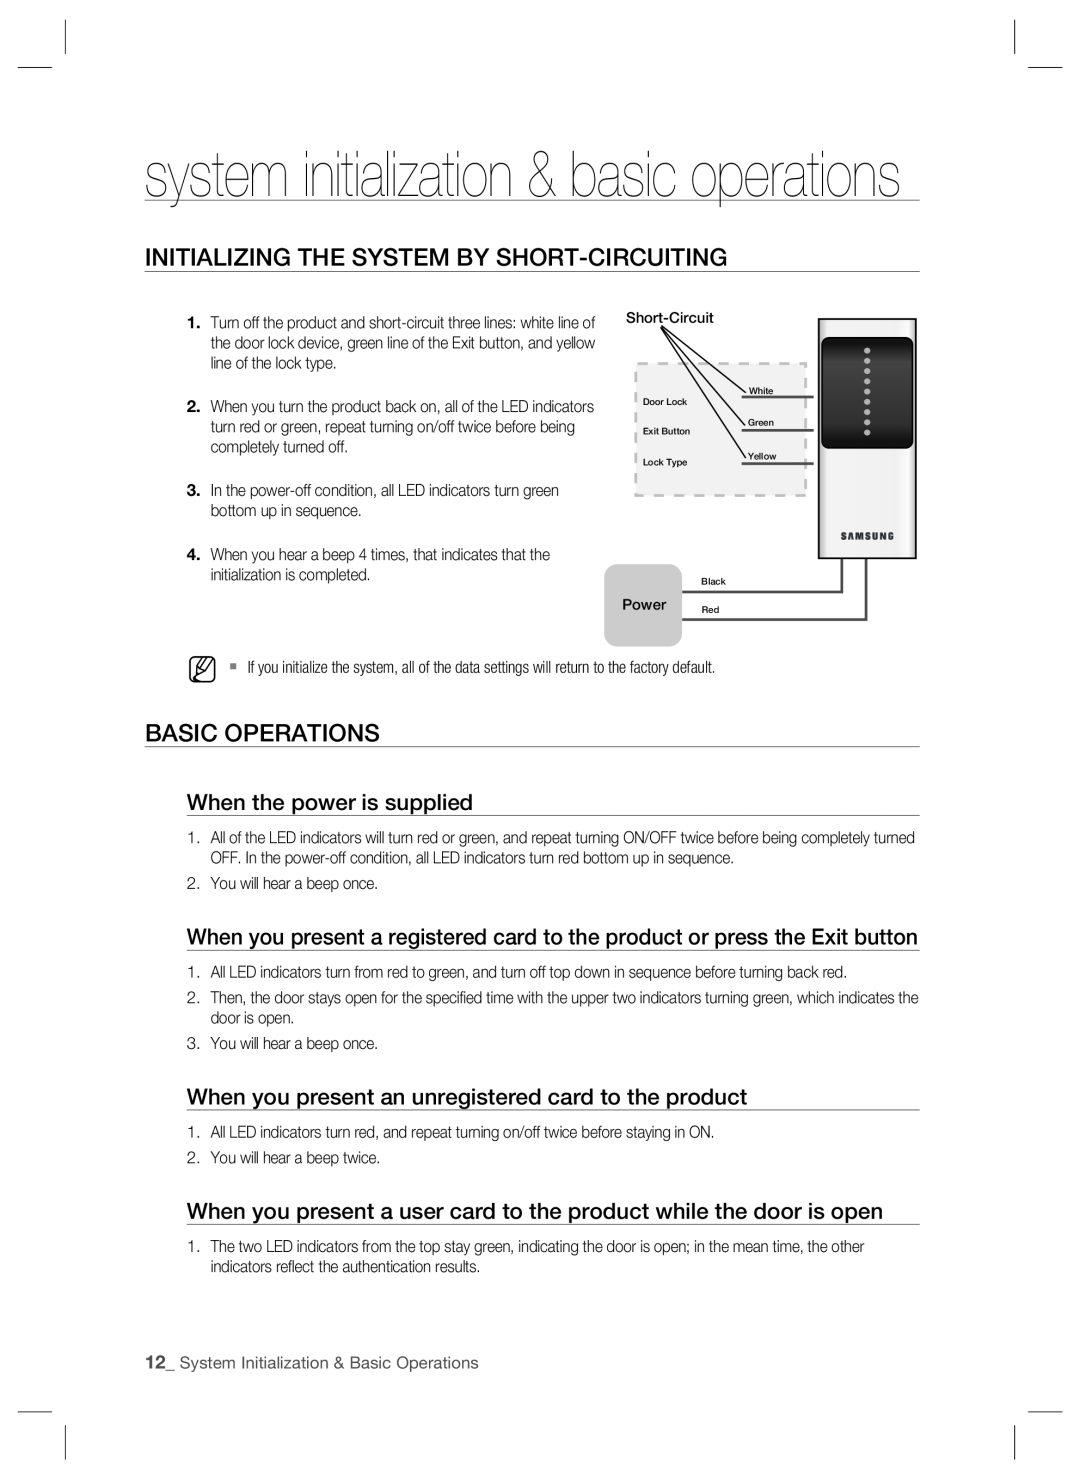 Samsung SSA-S1000 Initializing The System By Short-Circuiting, Basic Operations, system initialization & basic operations 